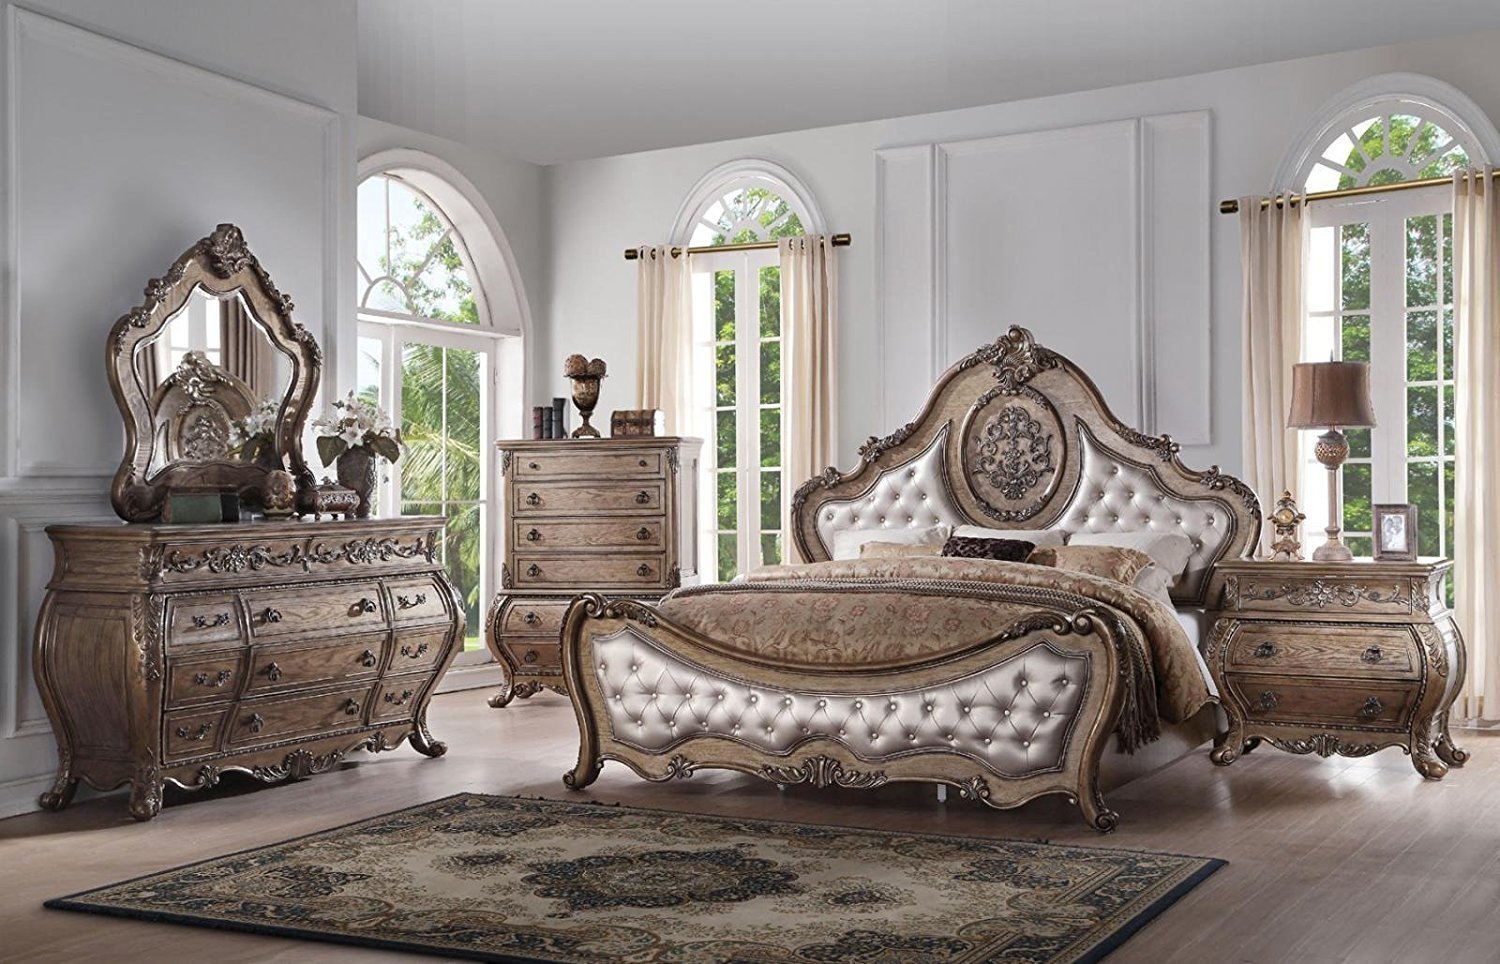 Luxury King Bedroom Sets - Royal Furniture Antique Gold Beds Luxurious ...